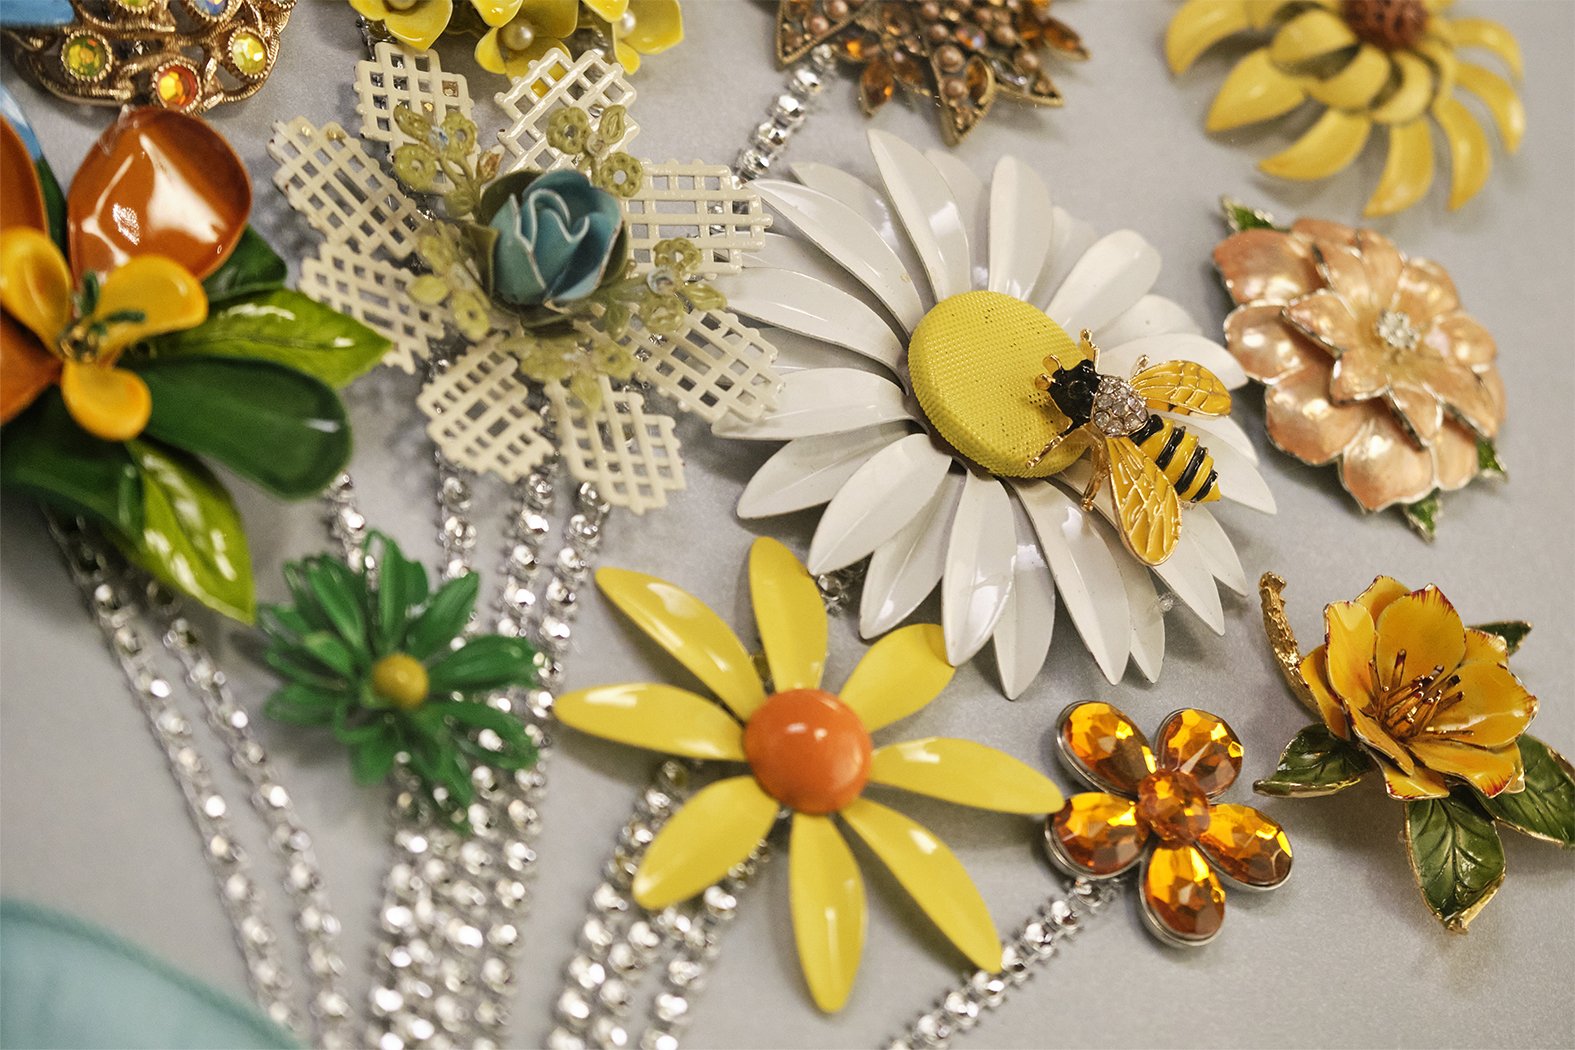  “J Schwanke’s Life in Bloom” is filled with projects, recipes and crafts - all inspired by flowers- including this wall art- created from Vintage Flower Brooches- featured in Season 4- coming in April 2022.